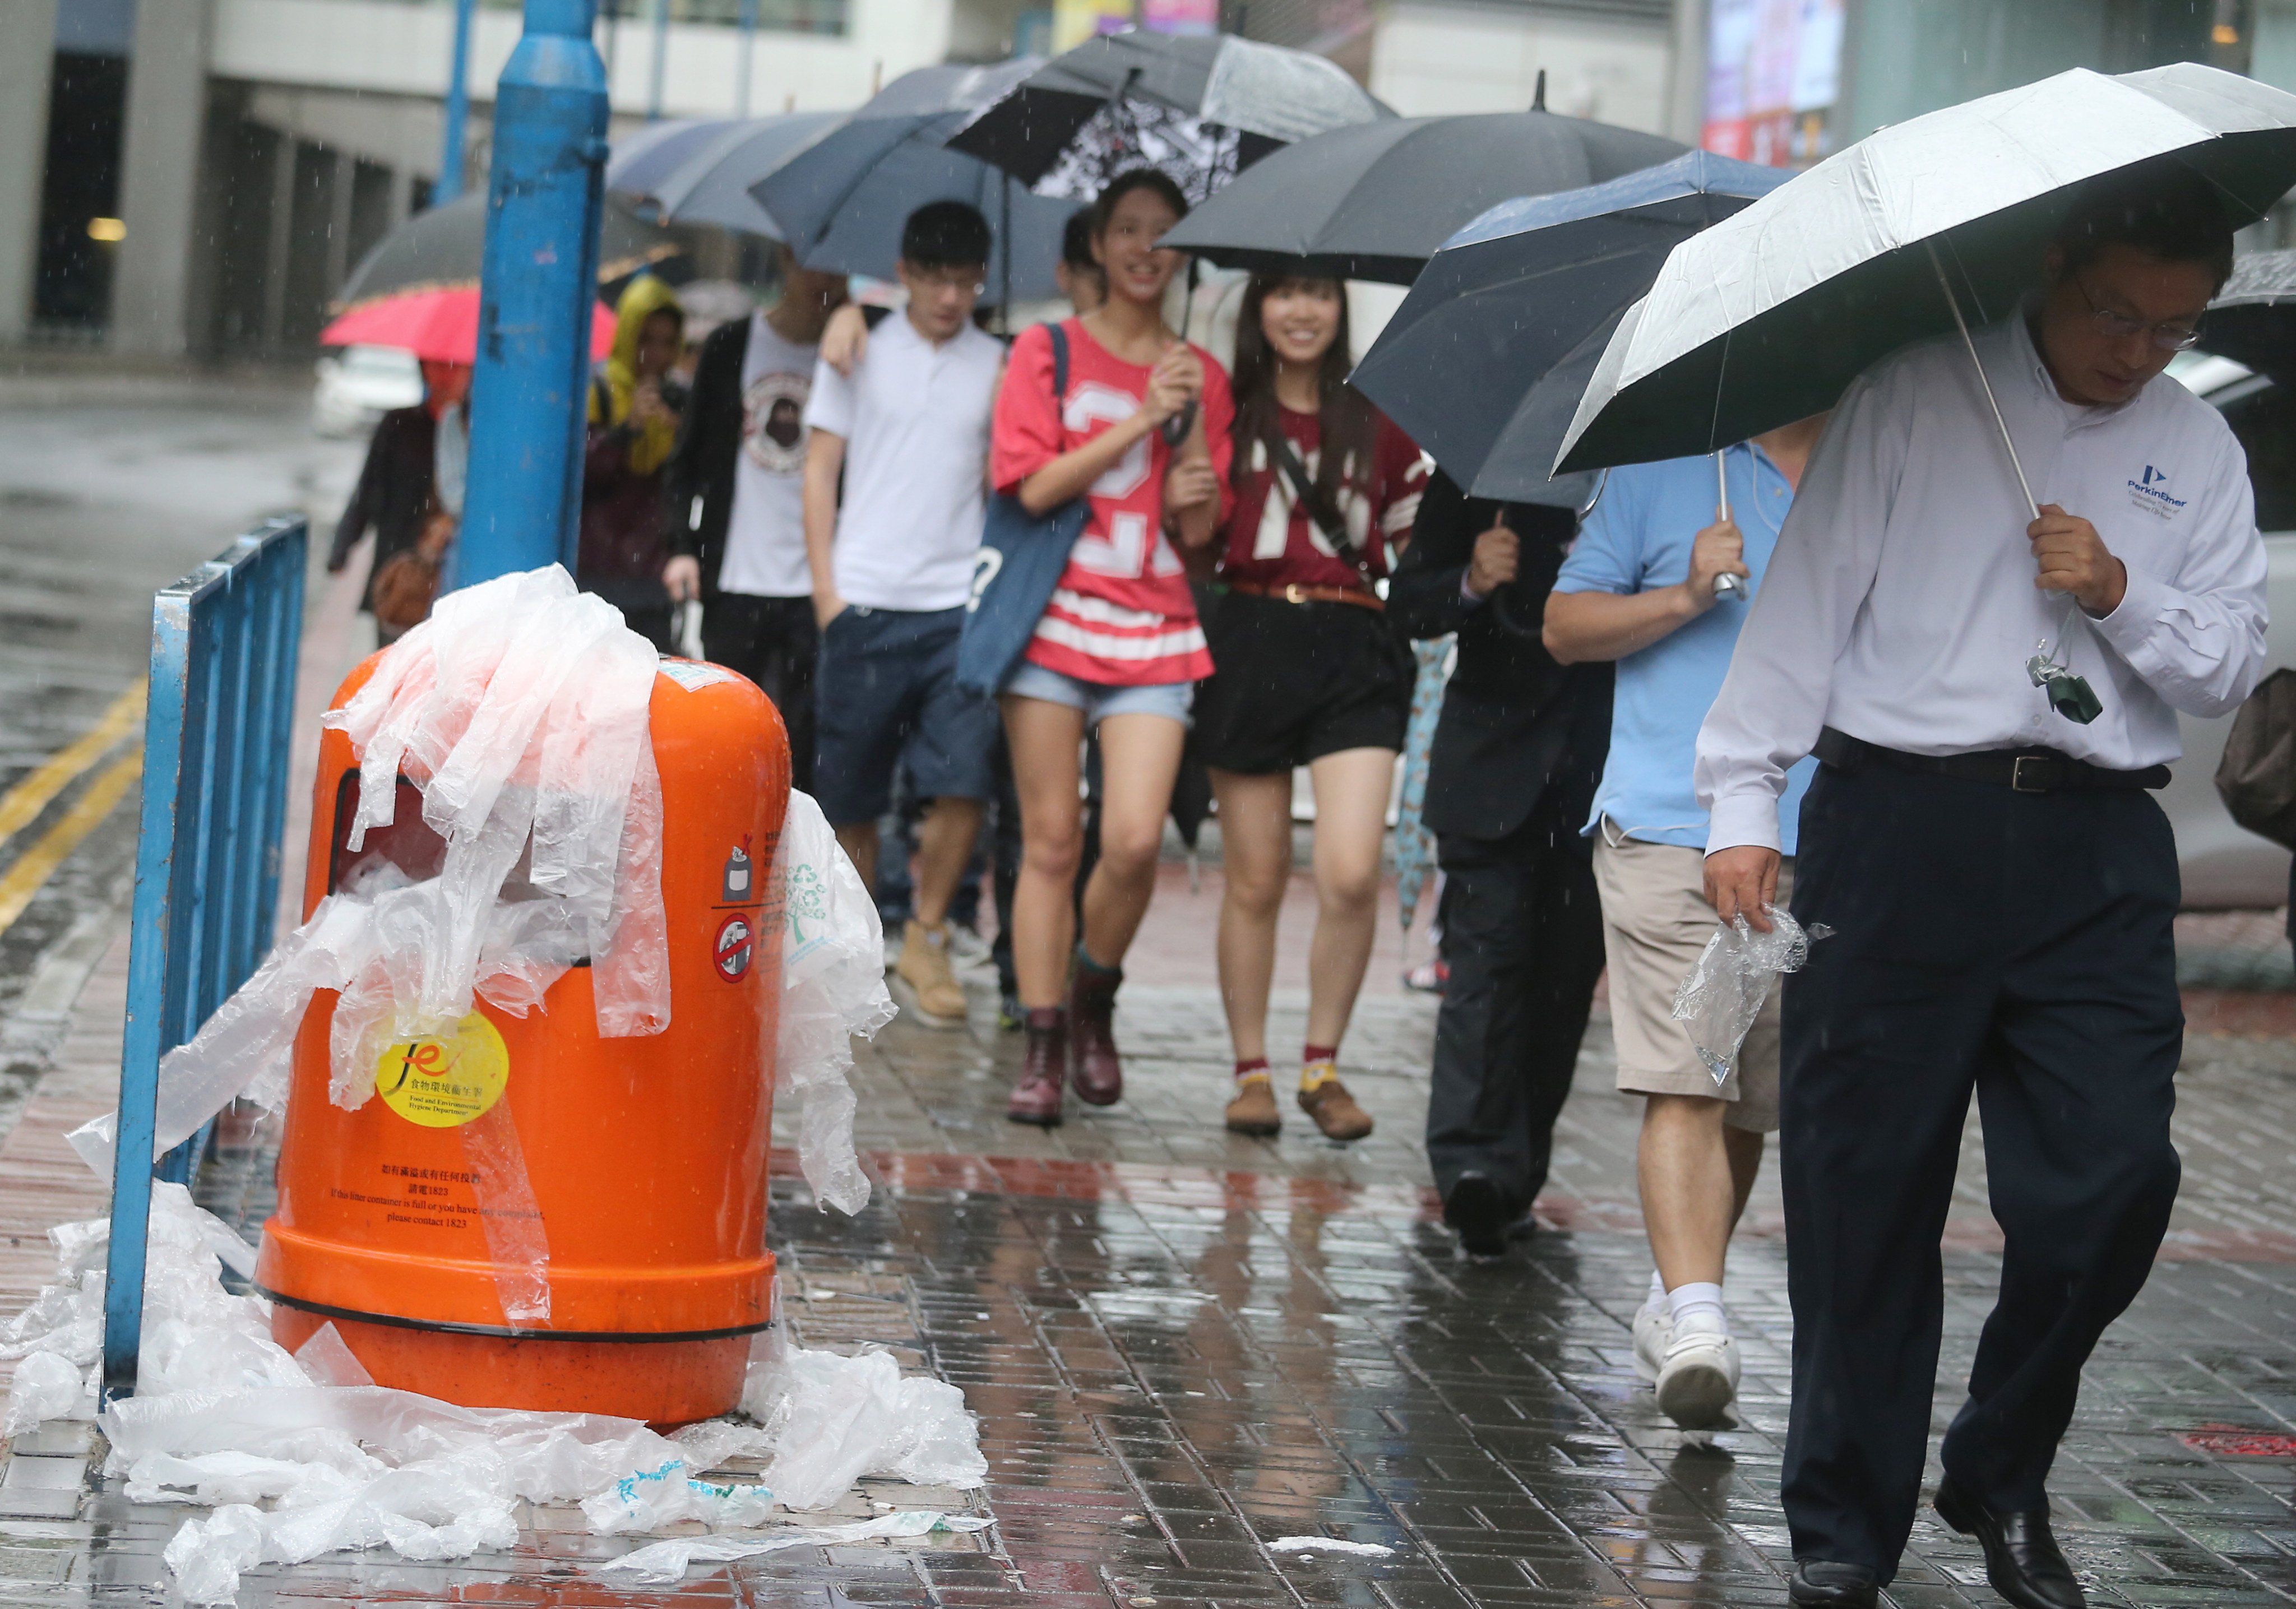 A bin overflows with plastic umbrella bags on a rainy day in Kwun Tong. Two-thirds of plastic is produced for single use. Photo: David Wong

